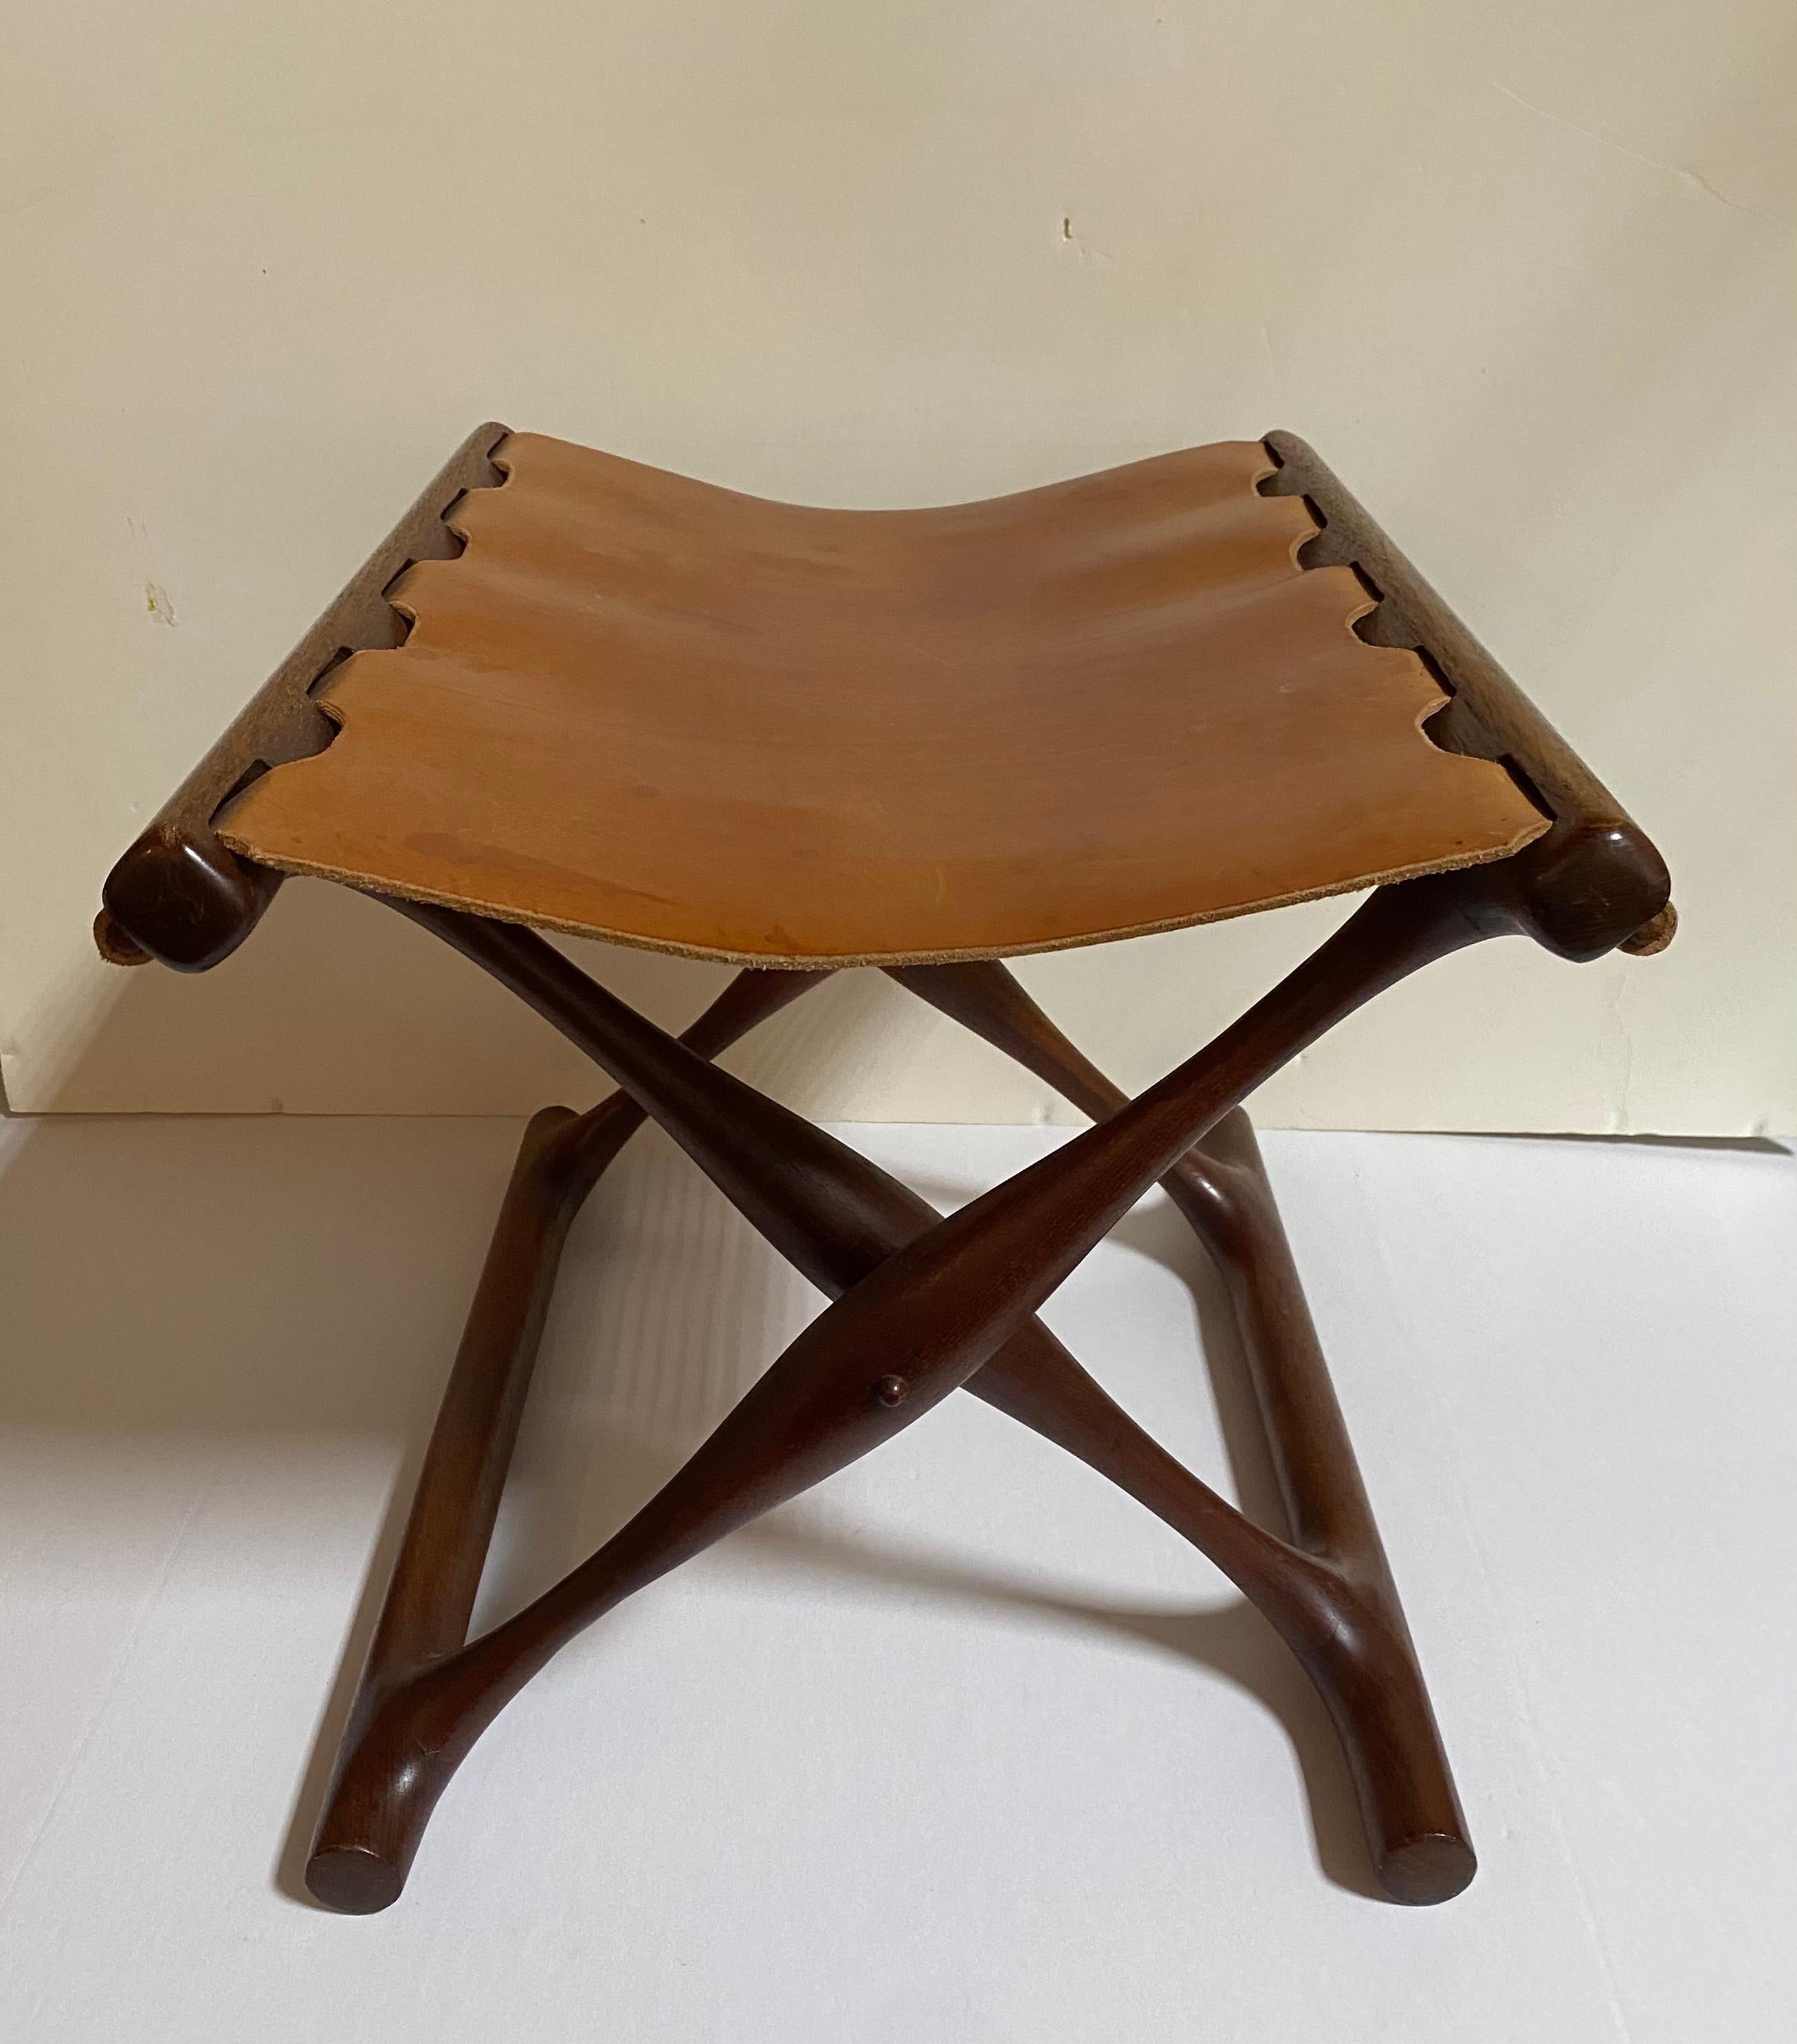 Wood and Cognac leather folding stool designed by Poul Hundevad. circa 1950. Unsigned. Base in very good vintage condition with original leather seat.

Hundevad based his design on this folding stool on an original that was found in a grave dating